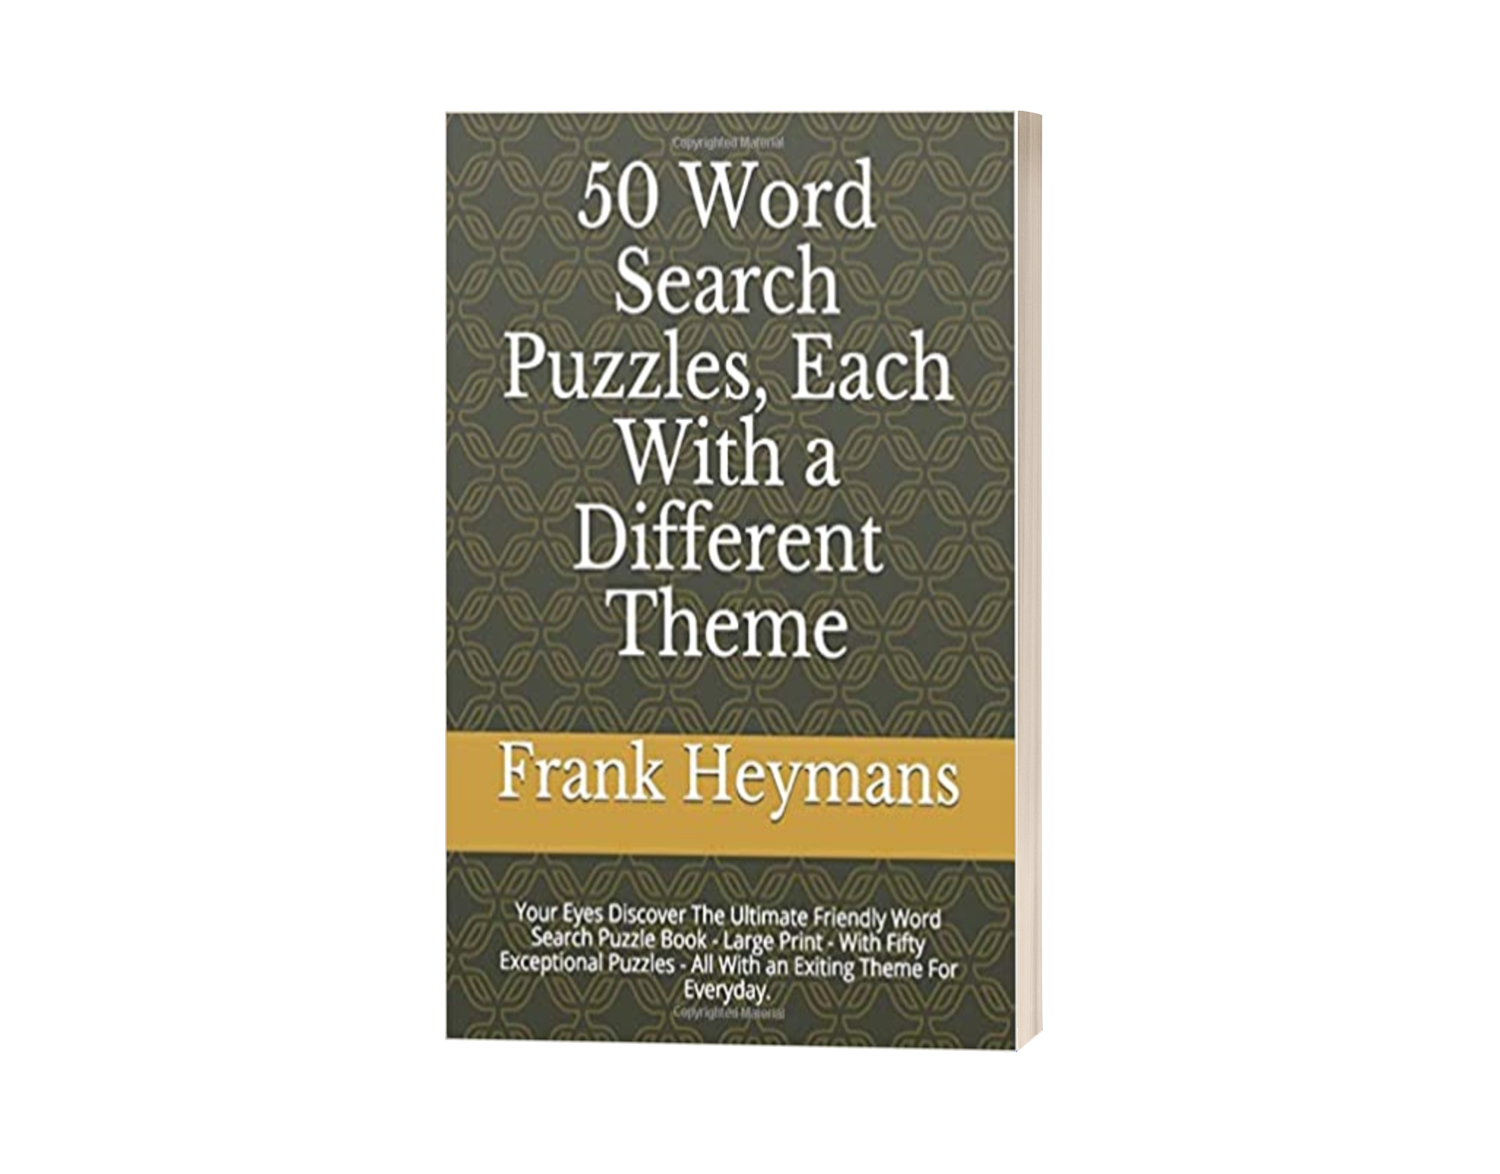 50 Word Search Puzzles, Each With a Different Theme